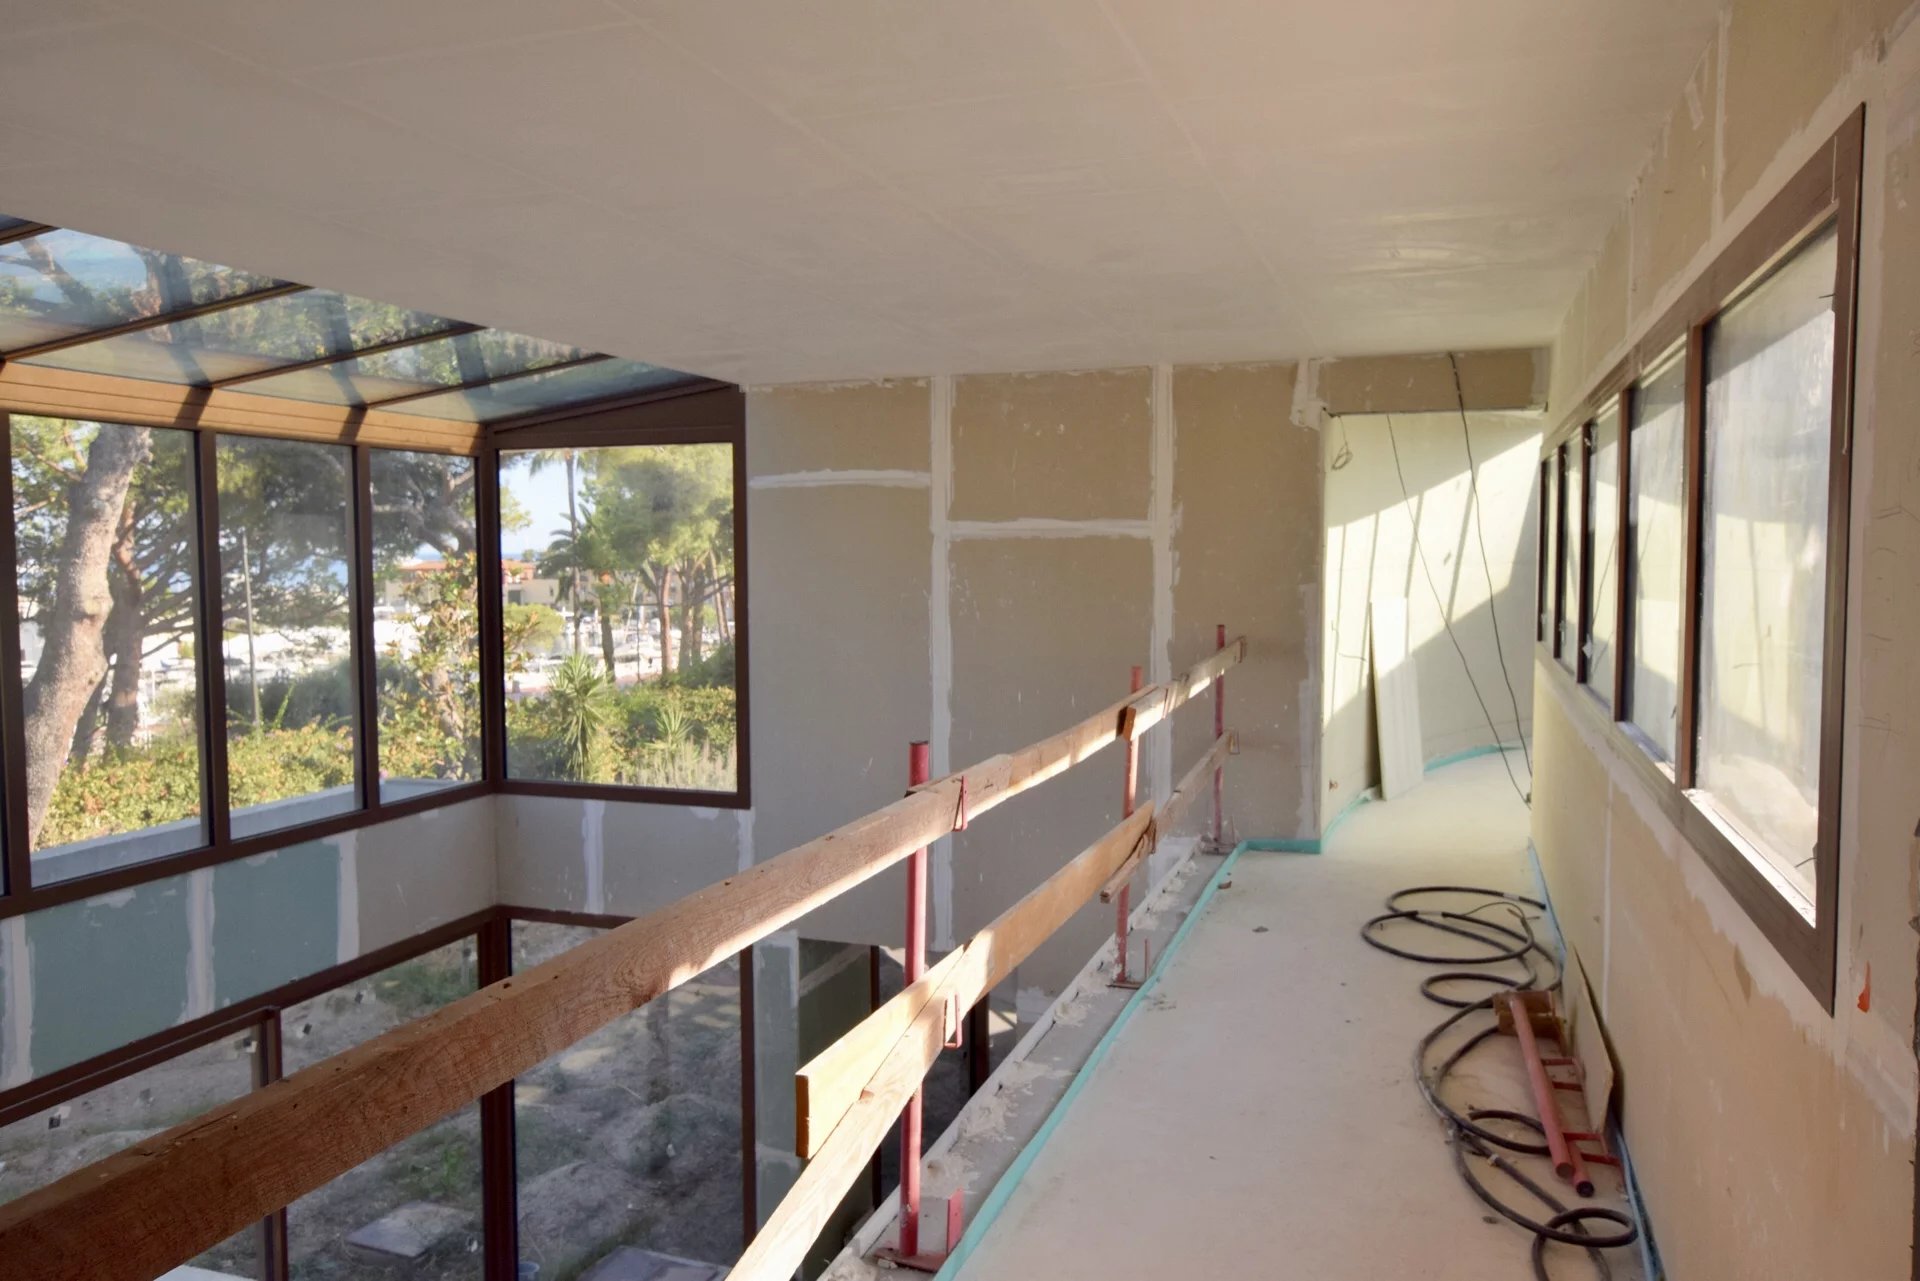 Project in Progress to Complete For Sale in Beaulieu-sur-Mer France